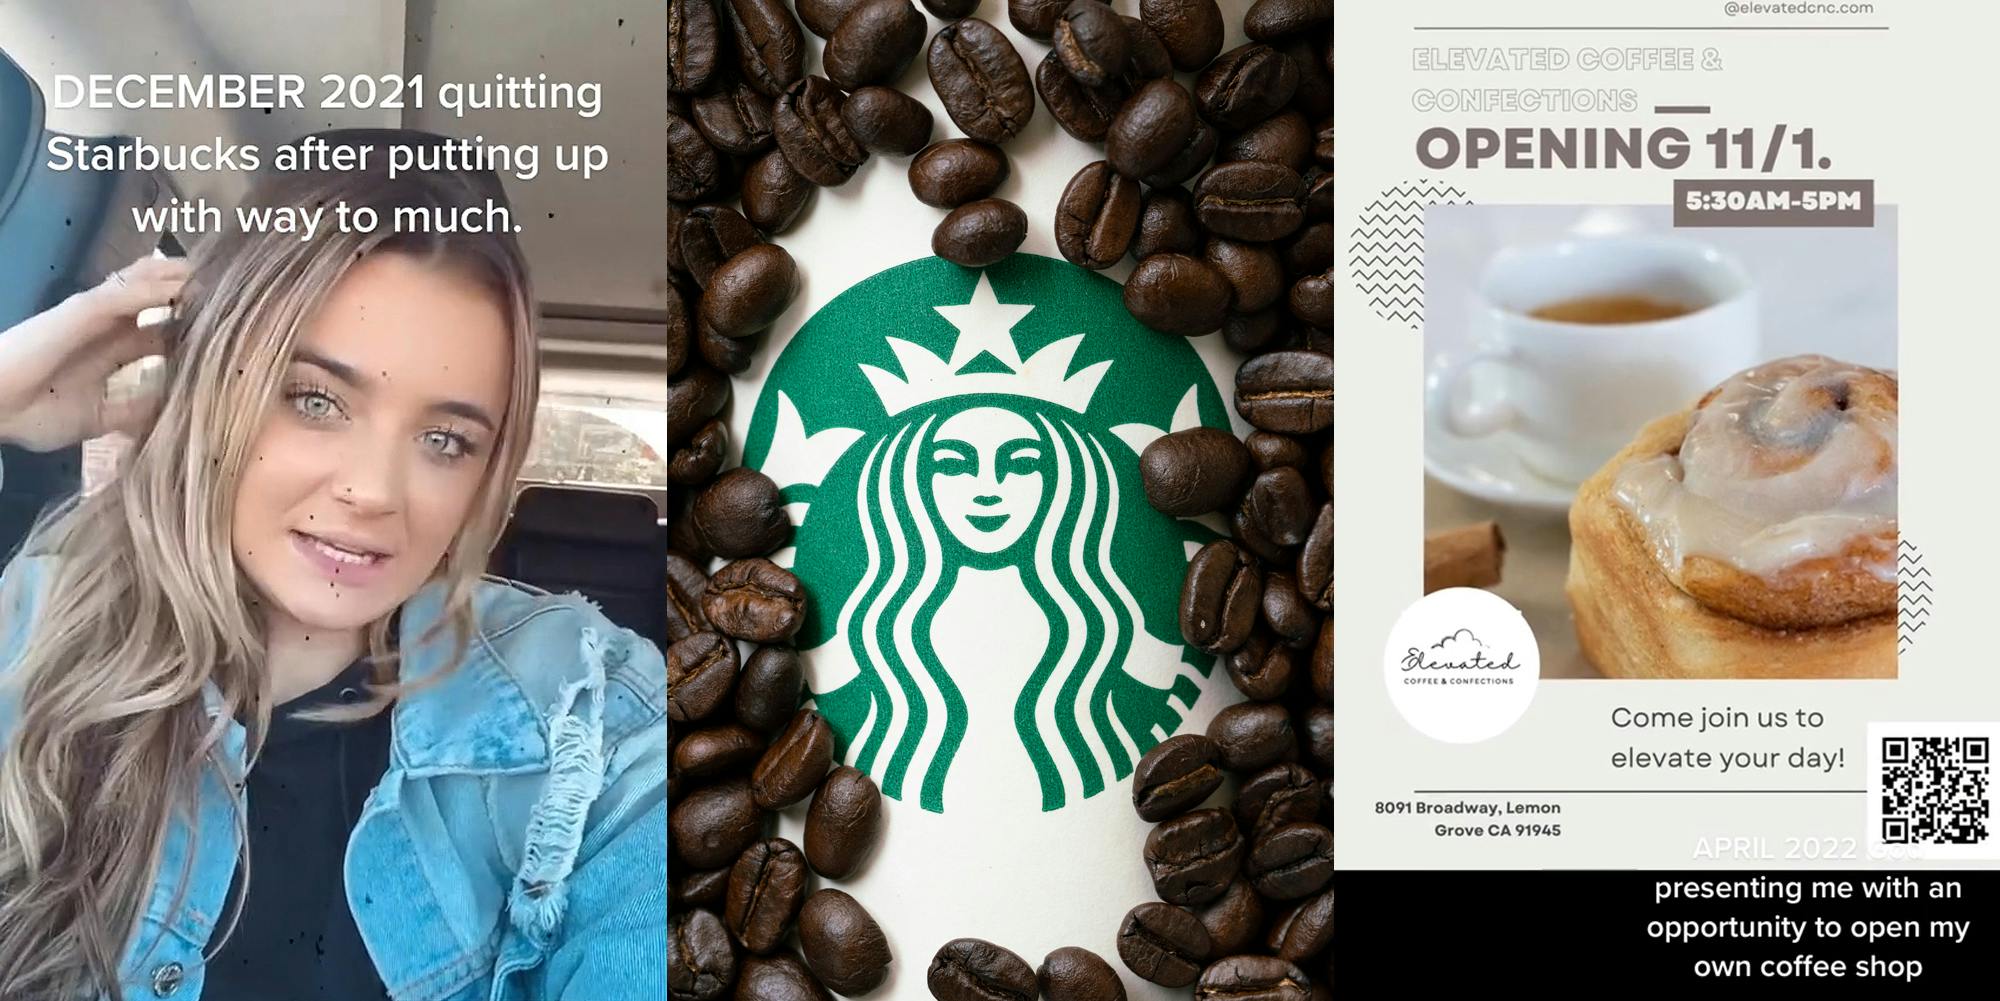 woman speaking in car caption "DECEMBER 2021 quitting Starbucks after putting up with way to much." (l) Starbucks logo with coffee beans spread around (c) Elevated Coffee & Confessions shop ad photo of cinnamon bun with coffee caption "APRIL 2022 presenting me with an opportunity to open my own coffee shop" (r)